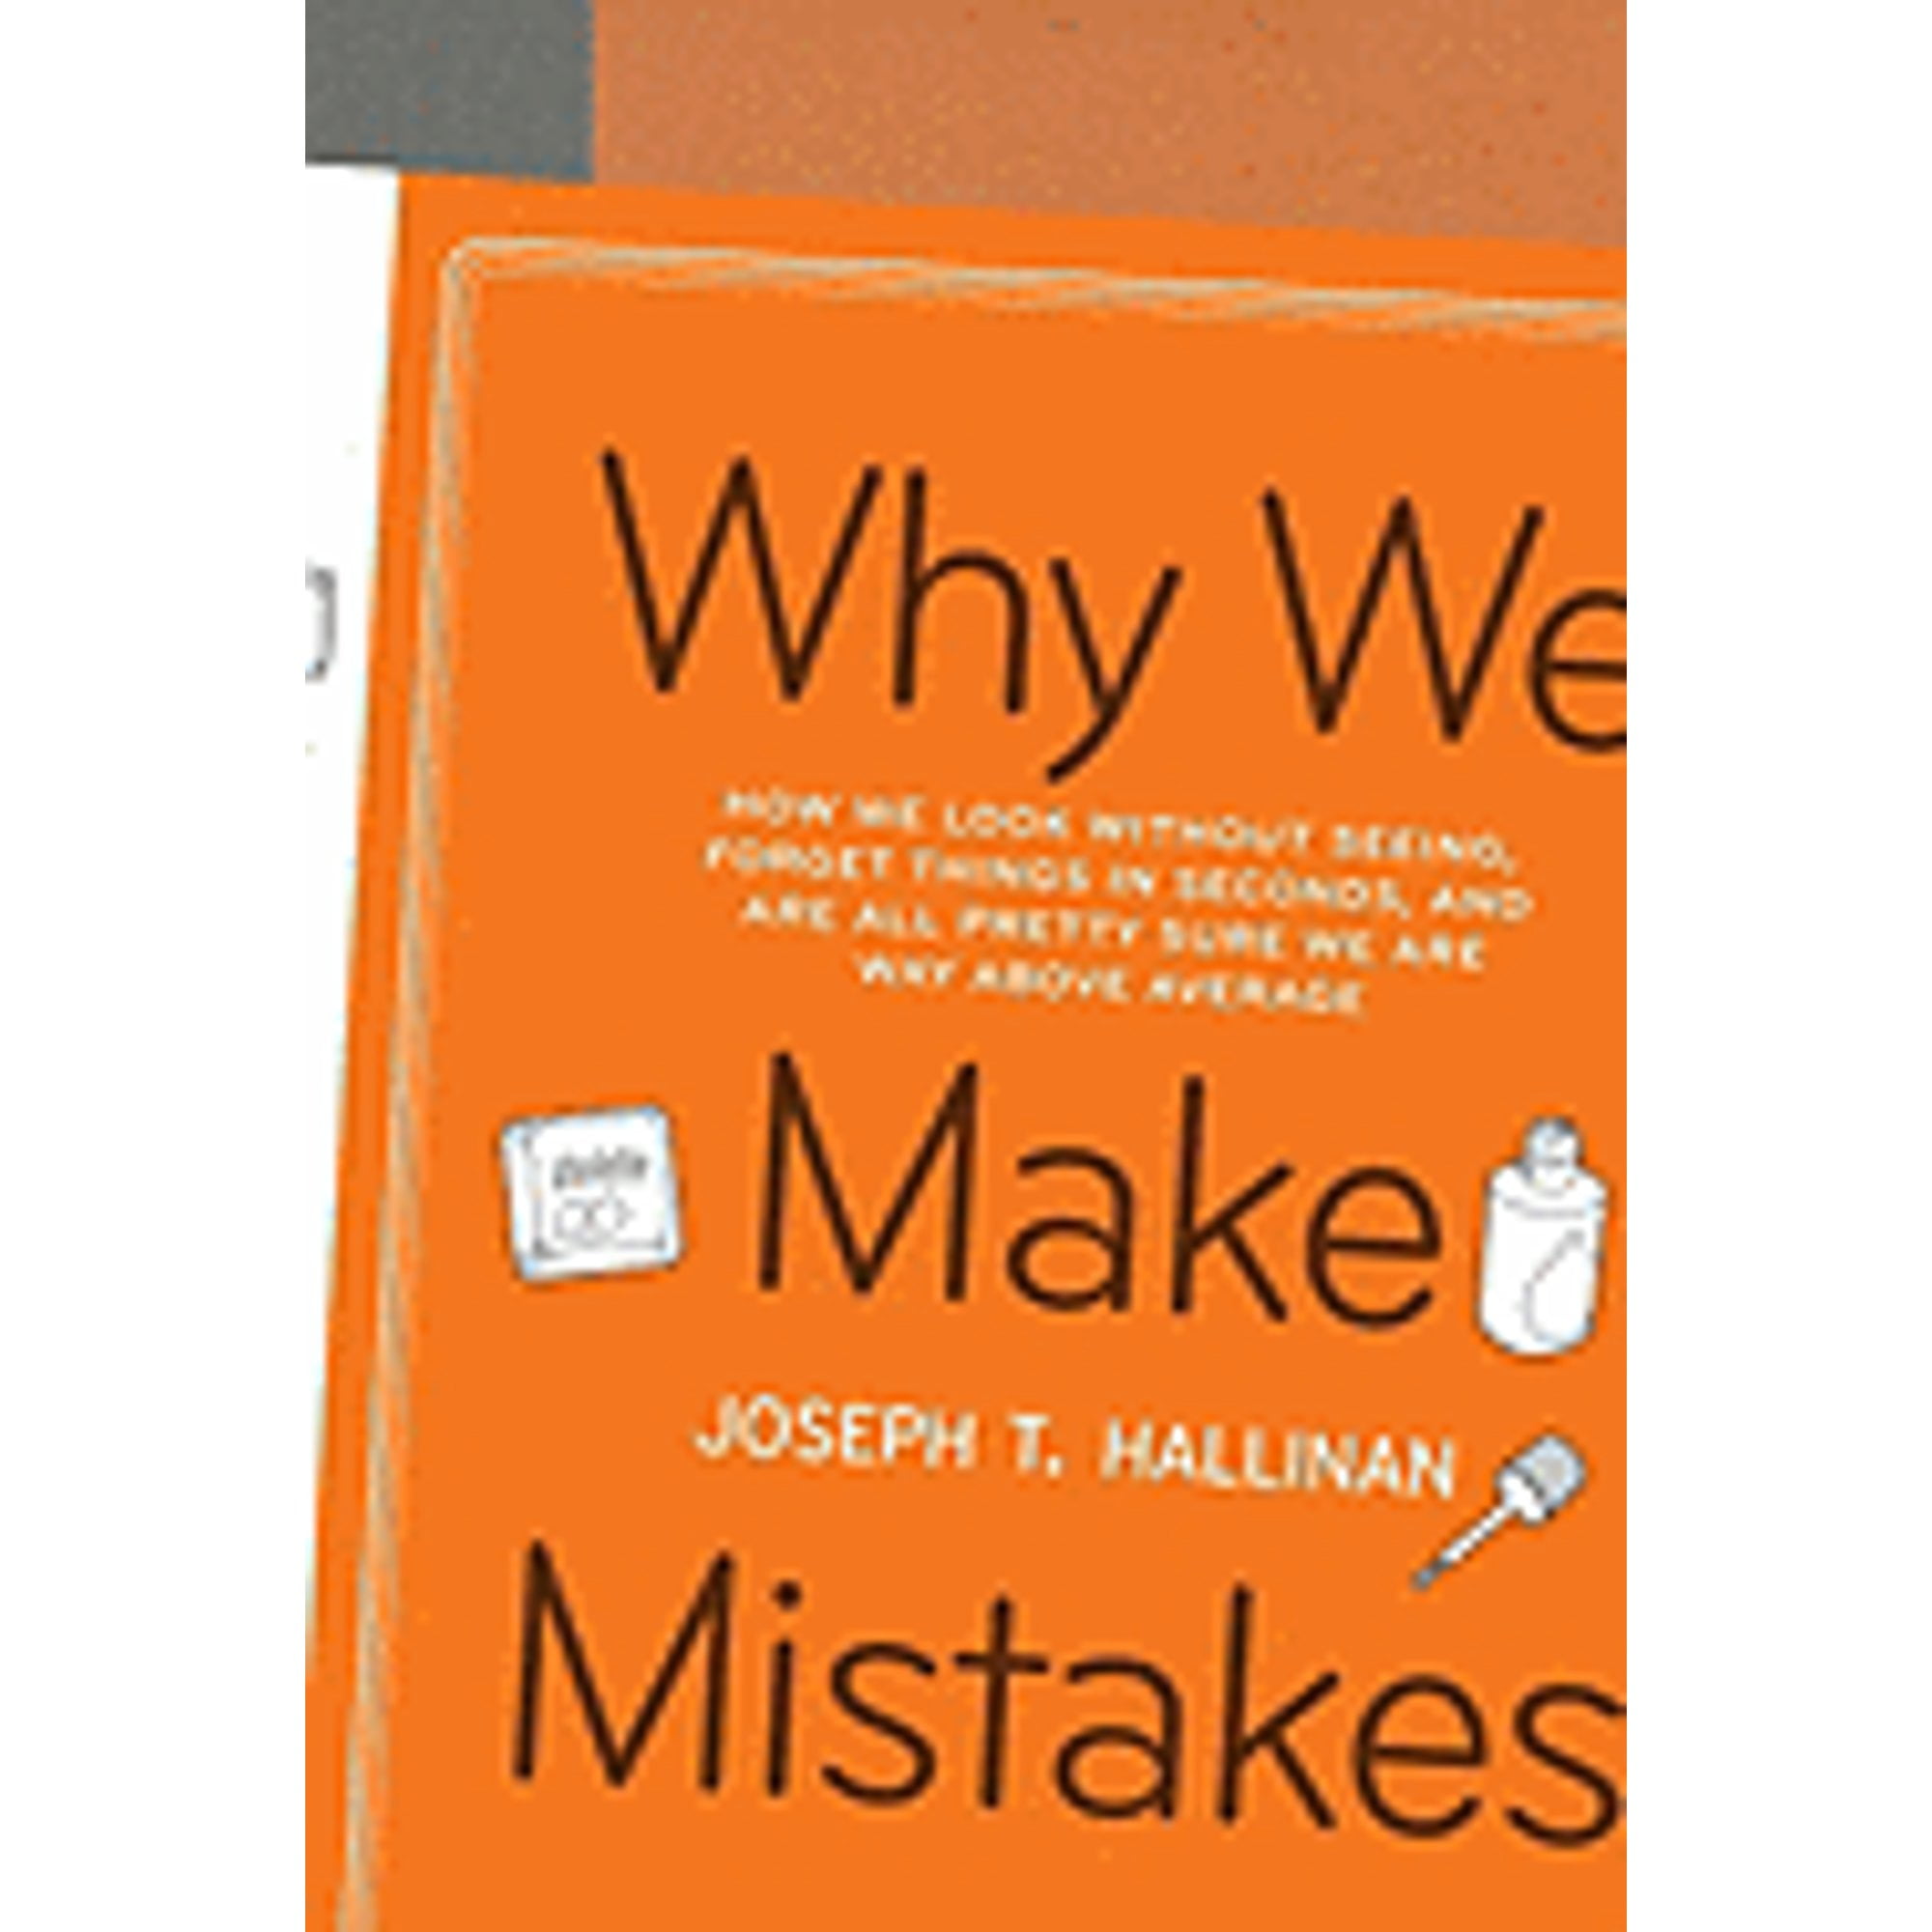 Why We Make Mistakes: How We Look by Hallinan, Joseph T.